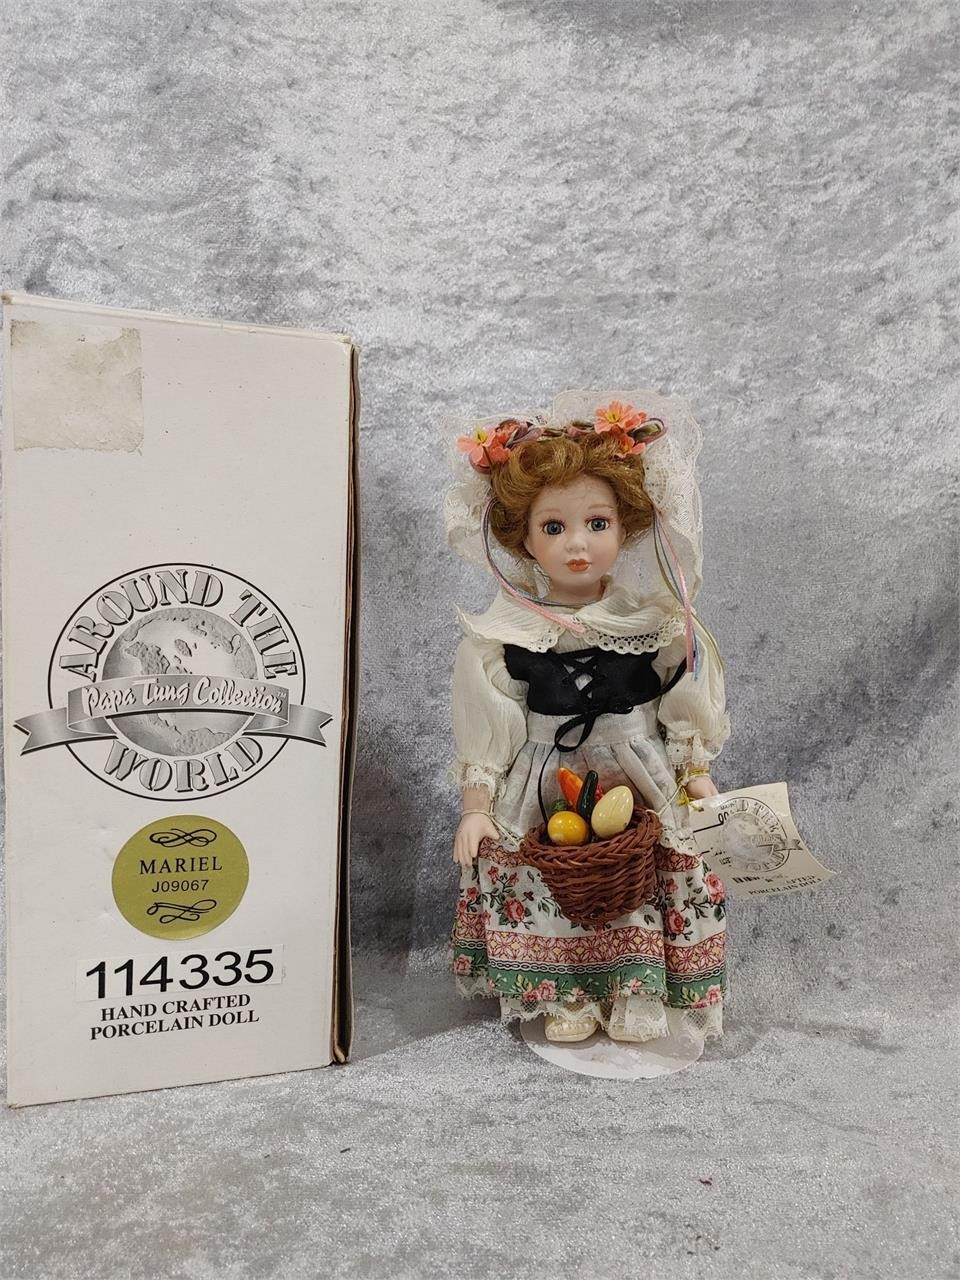 CLUTTER BUSTER Auction- Vintage Dolls, Glassware, pictures